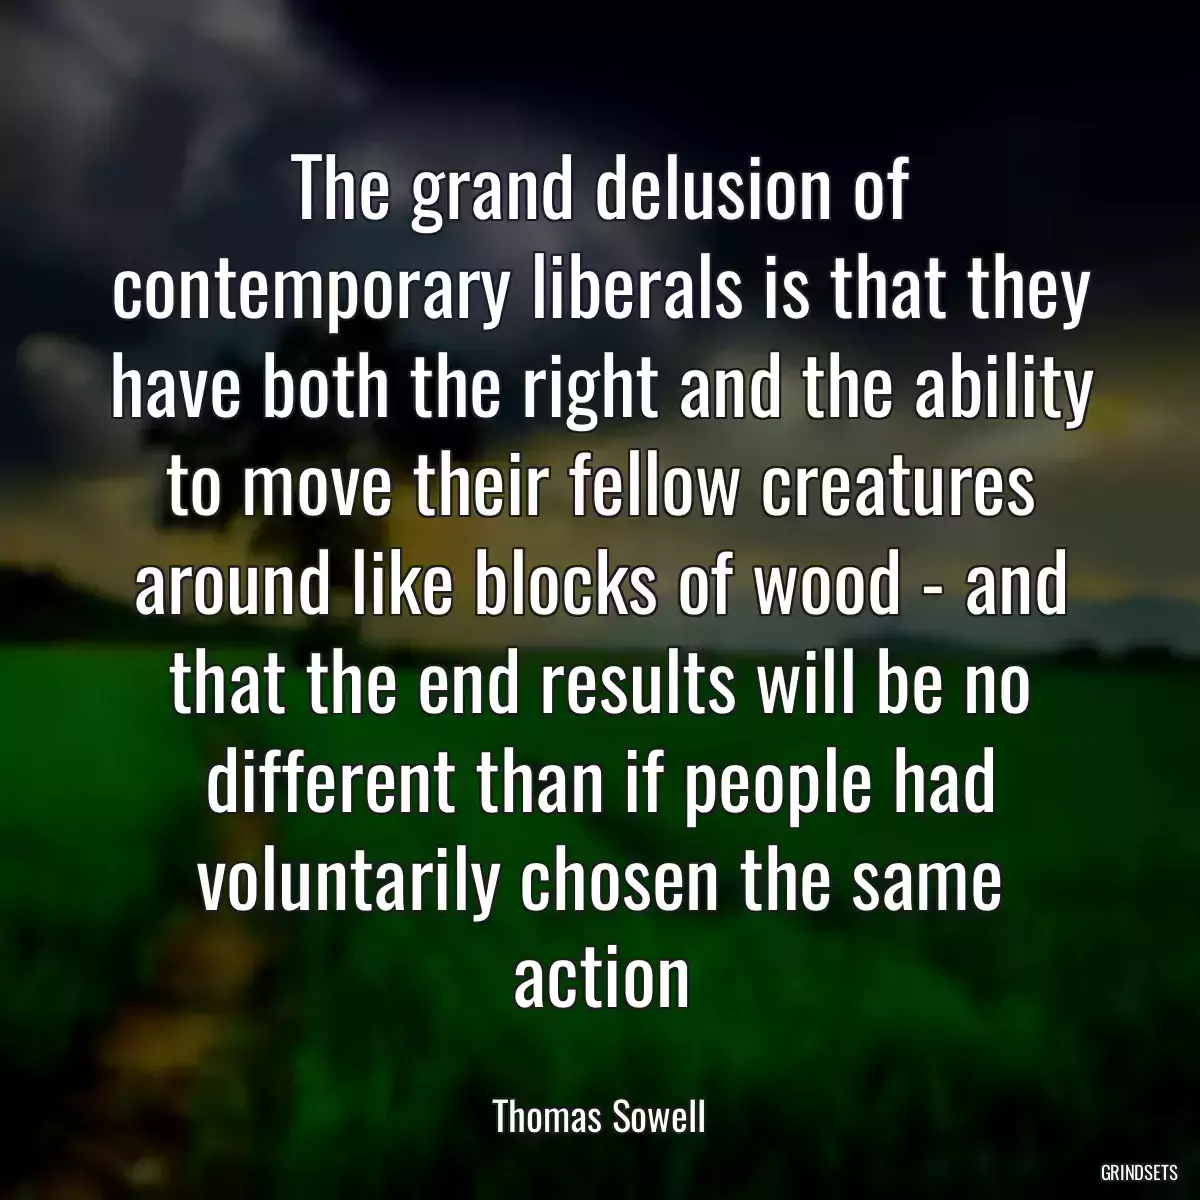 The grand delusion of contemporary liberals is that they have both the right and the ability to move their fellow creatures around like blocks of wood - and that the end results will be no different than if people had voluntarily chosen the same action